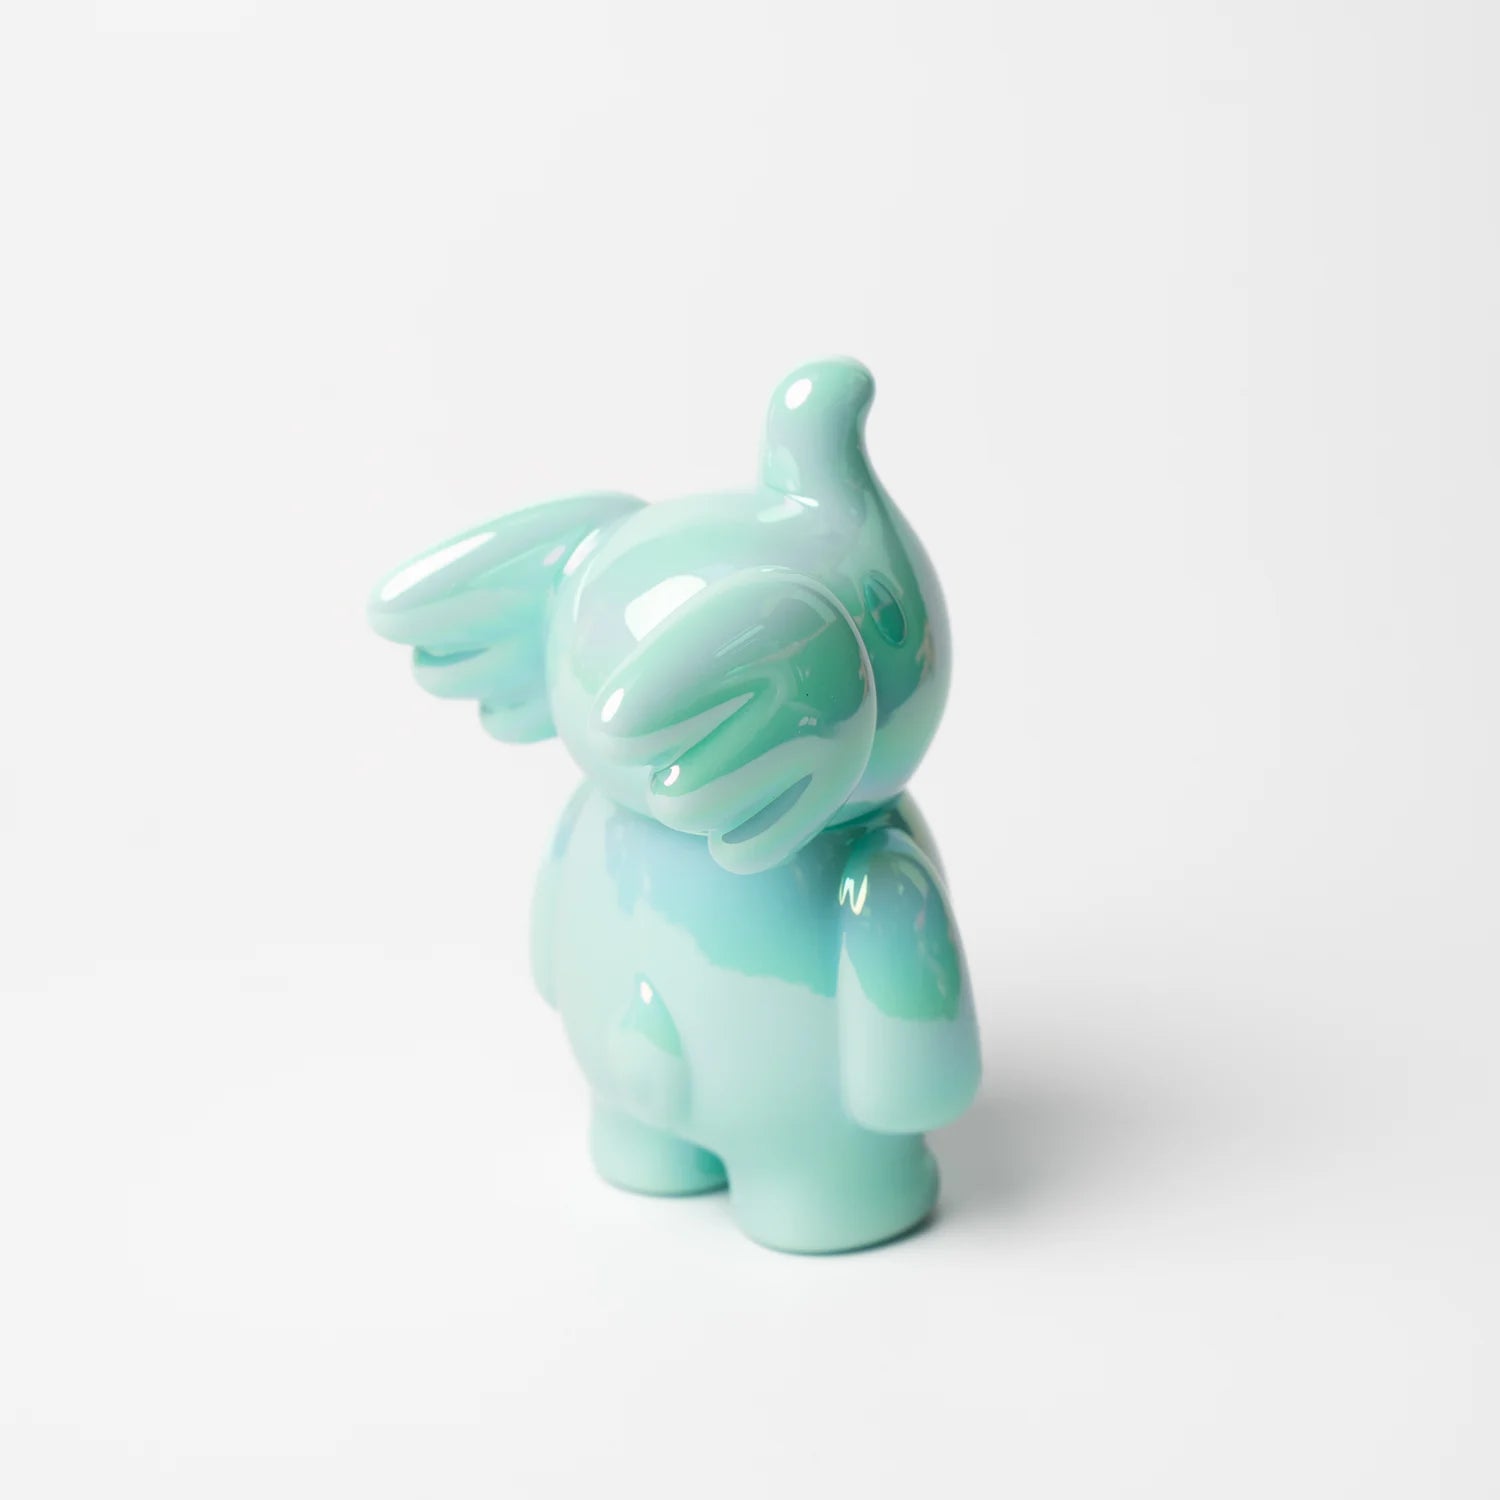 A small blue vinyl figurine with wings, titled ELFIE HERE I AM! 100% TIFFANY BLUE EDITION by Too Natthapong, approximately 3 inches tall.